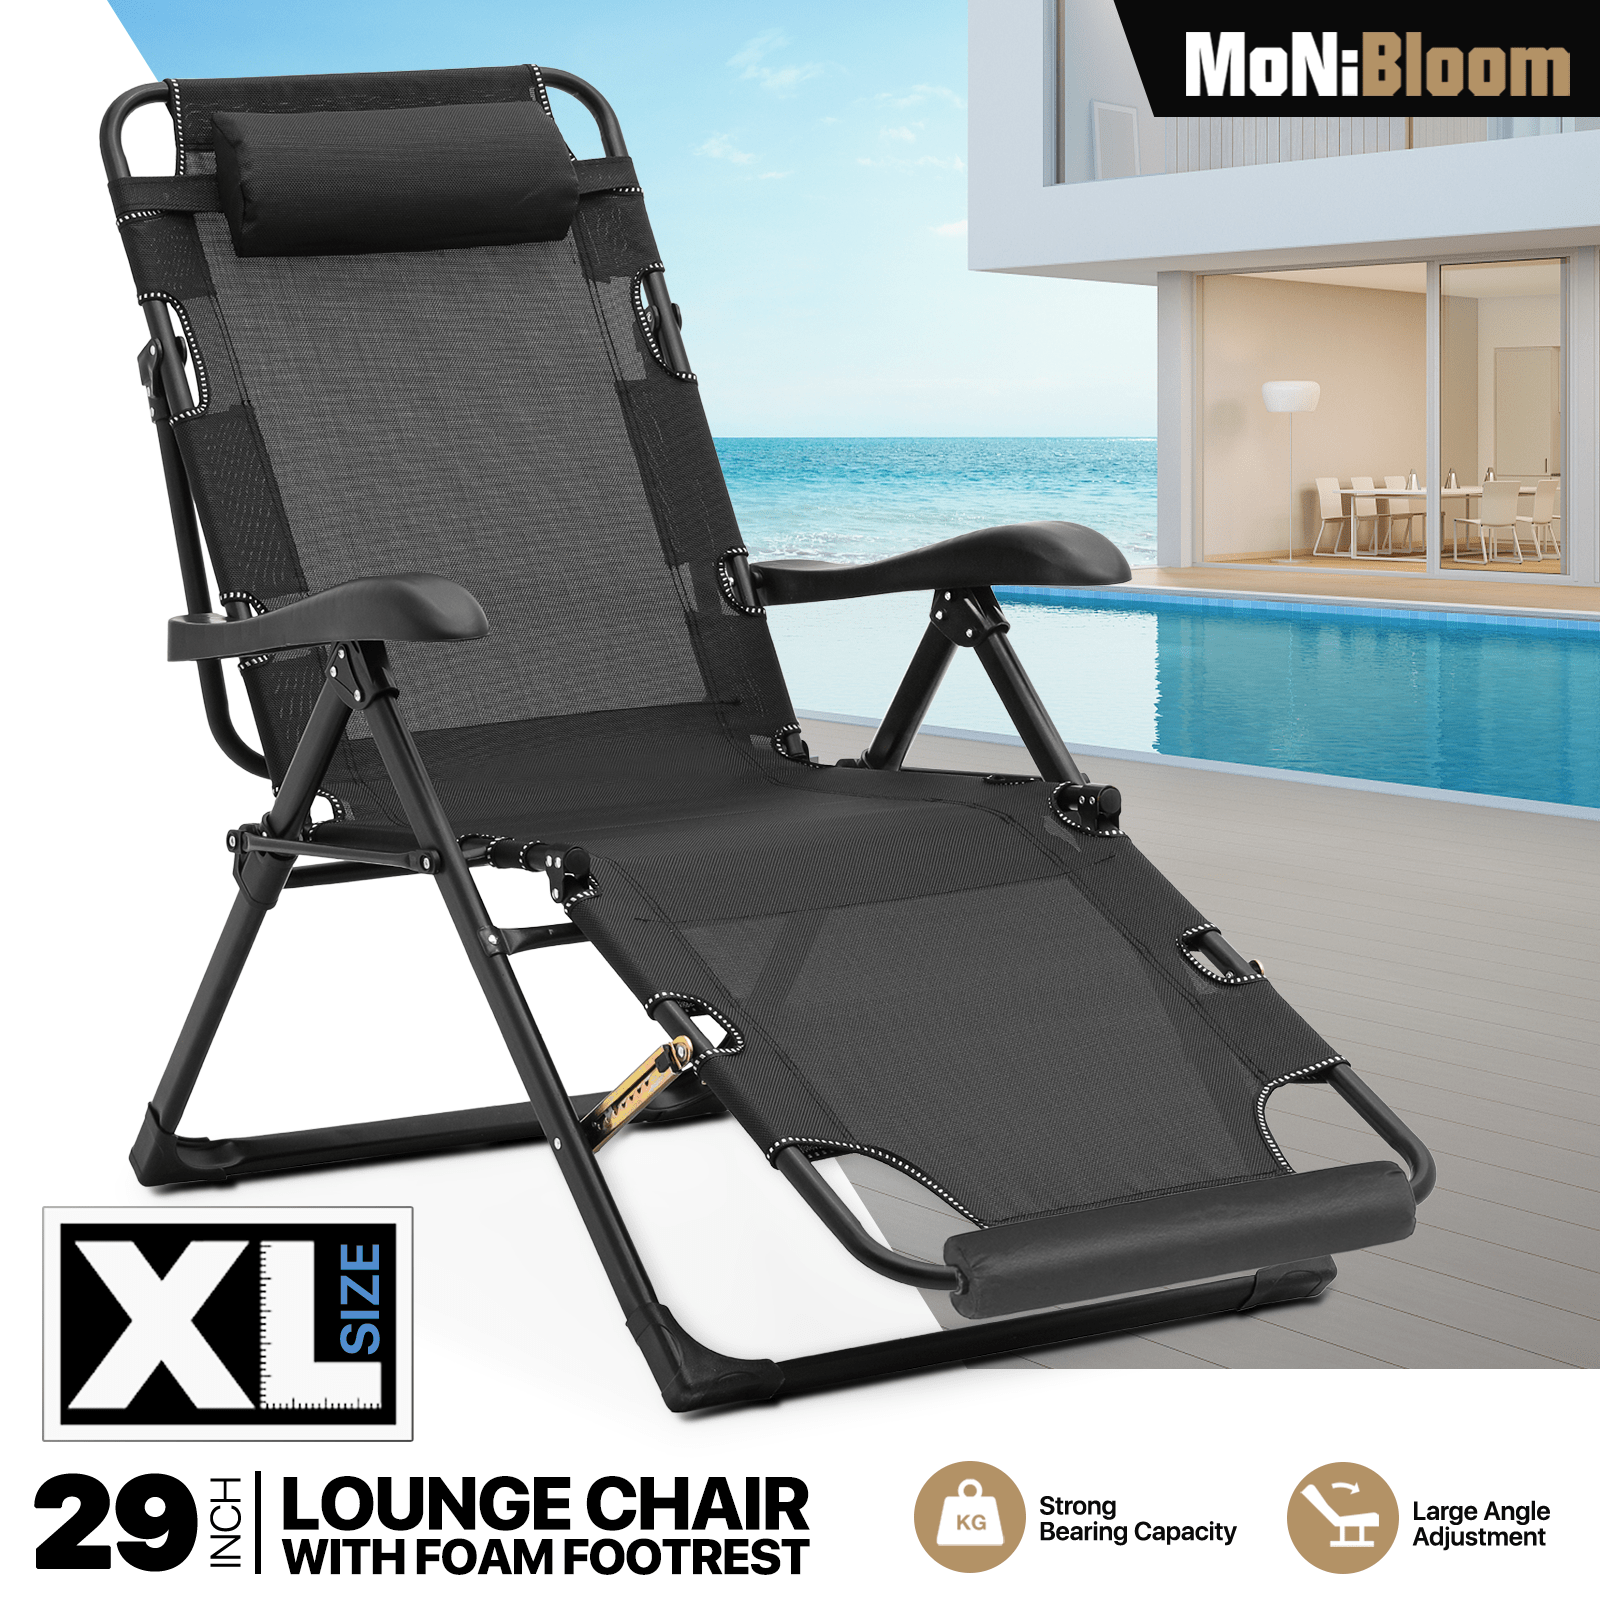 

Patio Lounge Chair 29 Inch Width Outdoor Reclining Portable Folding Chair Lawn 3 In 1 Lounge Chair With Additional Support Bar And Adjustable Headrest For Poolside Backyard Beach